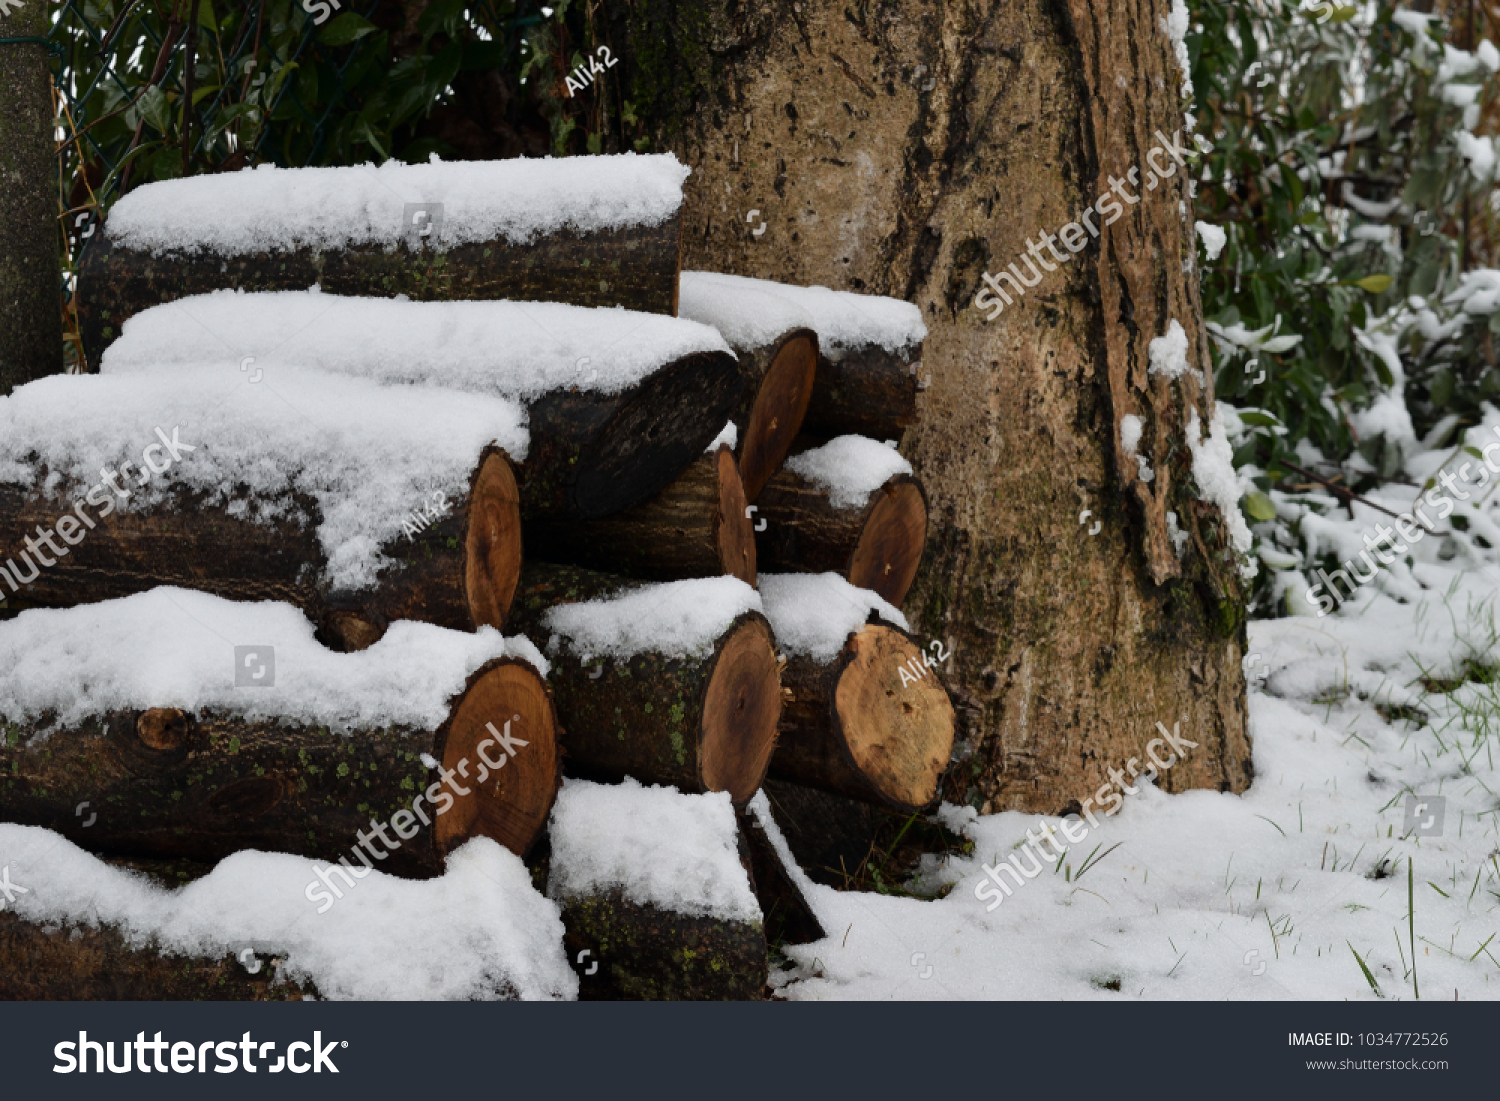 Winter wood log pile. A mosaic of wood stocks covered by a mantle of snow. #1034772526